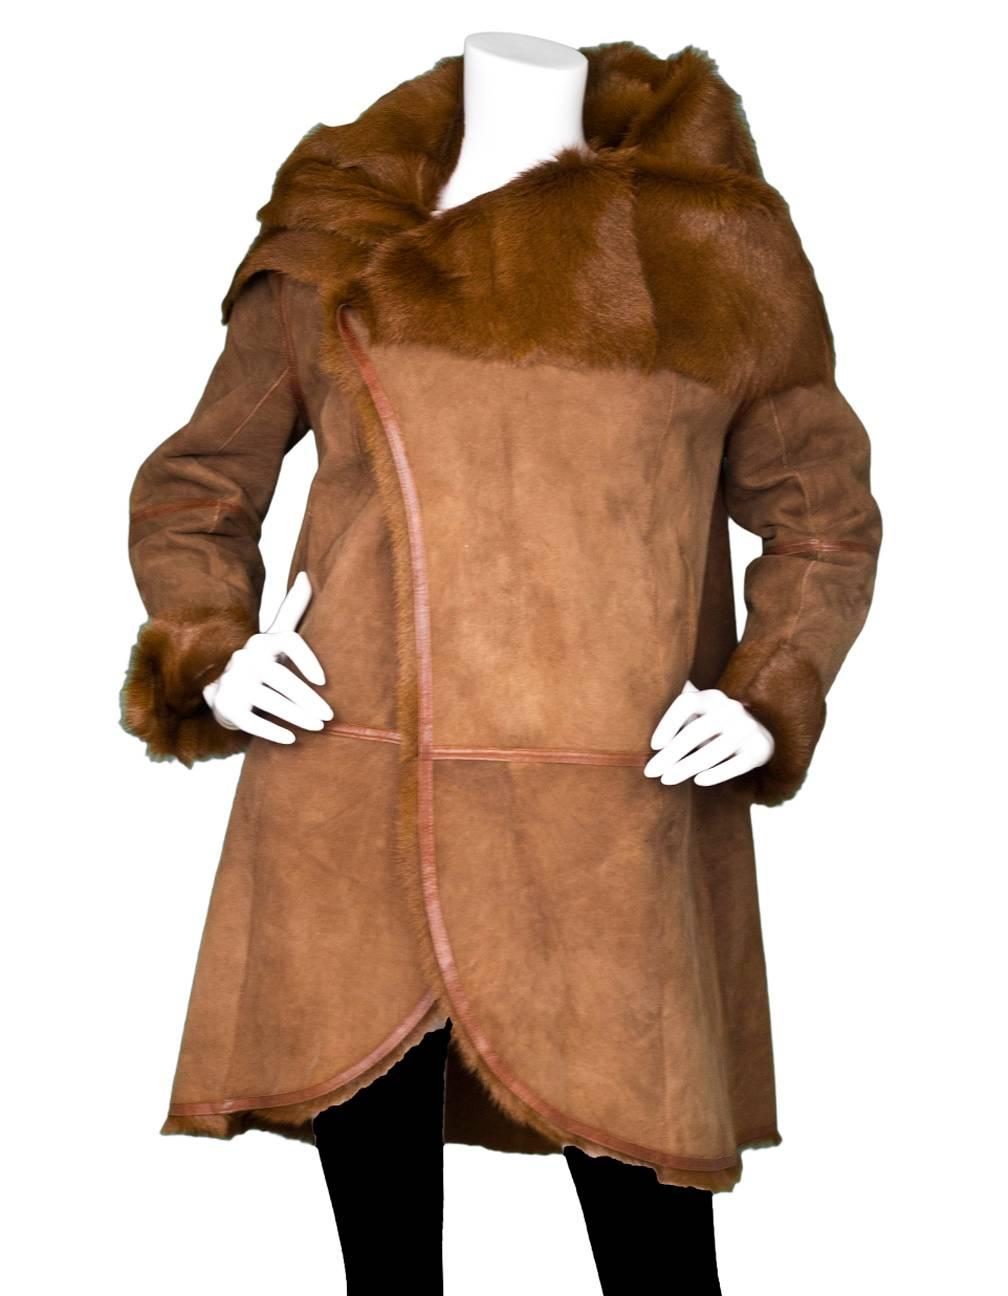 Meteo Brown Goat & Lamb Coat Sz FR40

Made In: France
Color: Brown
Composition: Goat and Lamb fur
Lining: Brown fur
Closure/Opening: Button closure
Exterior Pockets: Two hip pockets
Interior Pockets: None
Overall Condition: Excellent pre-owned